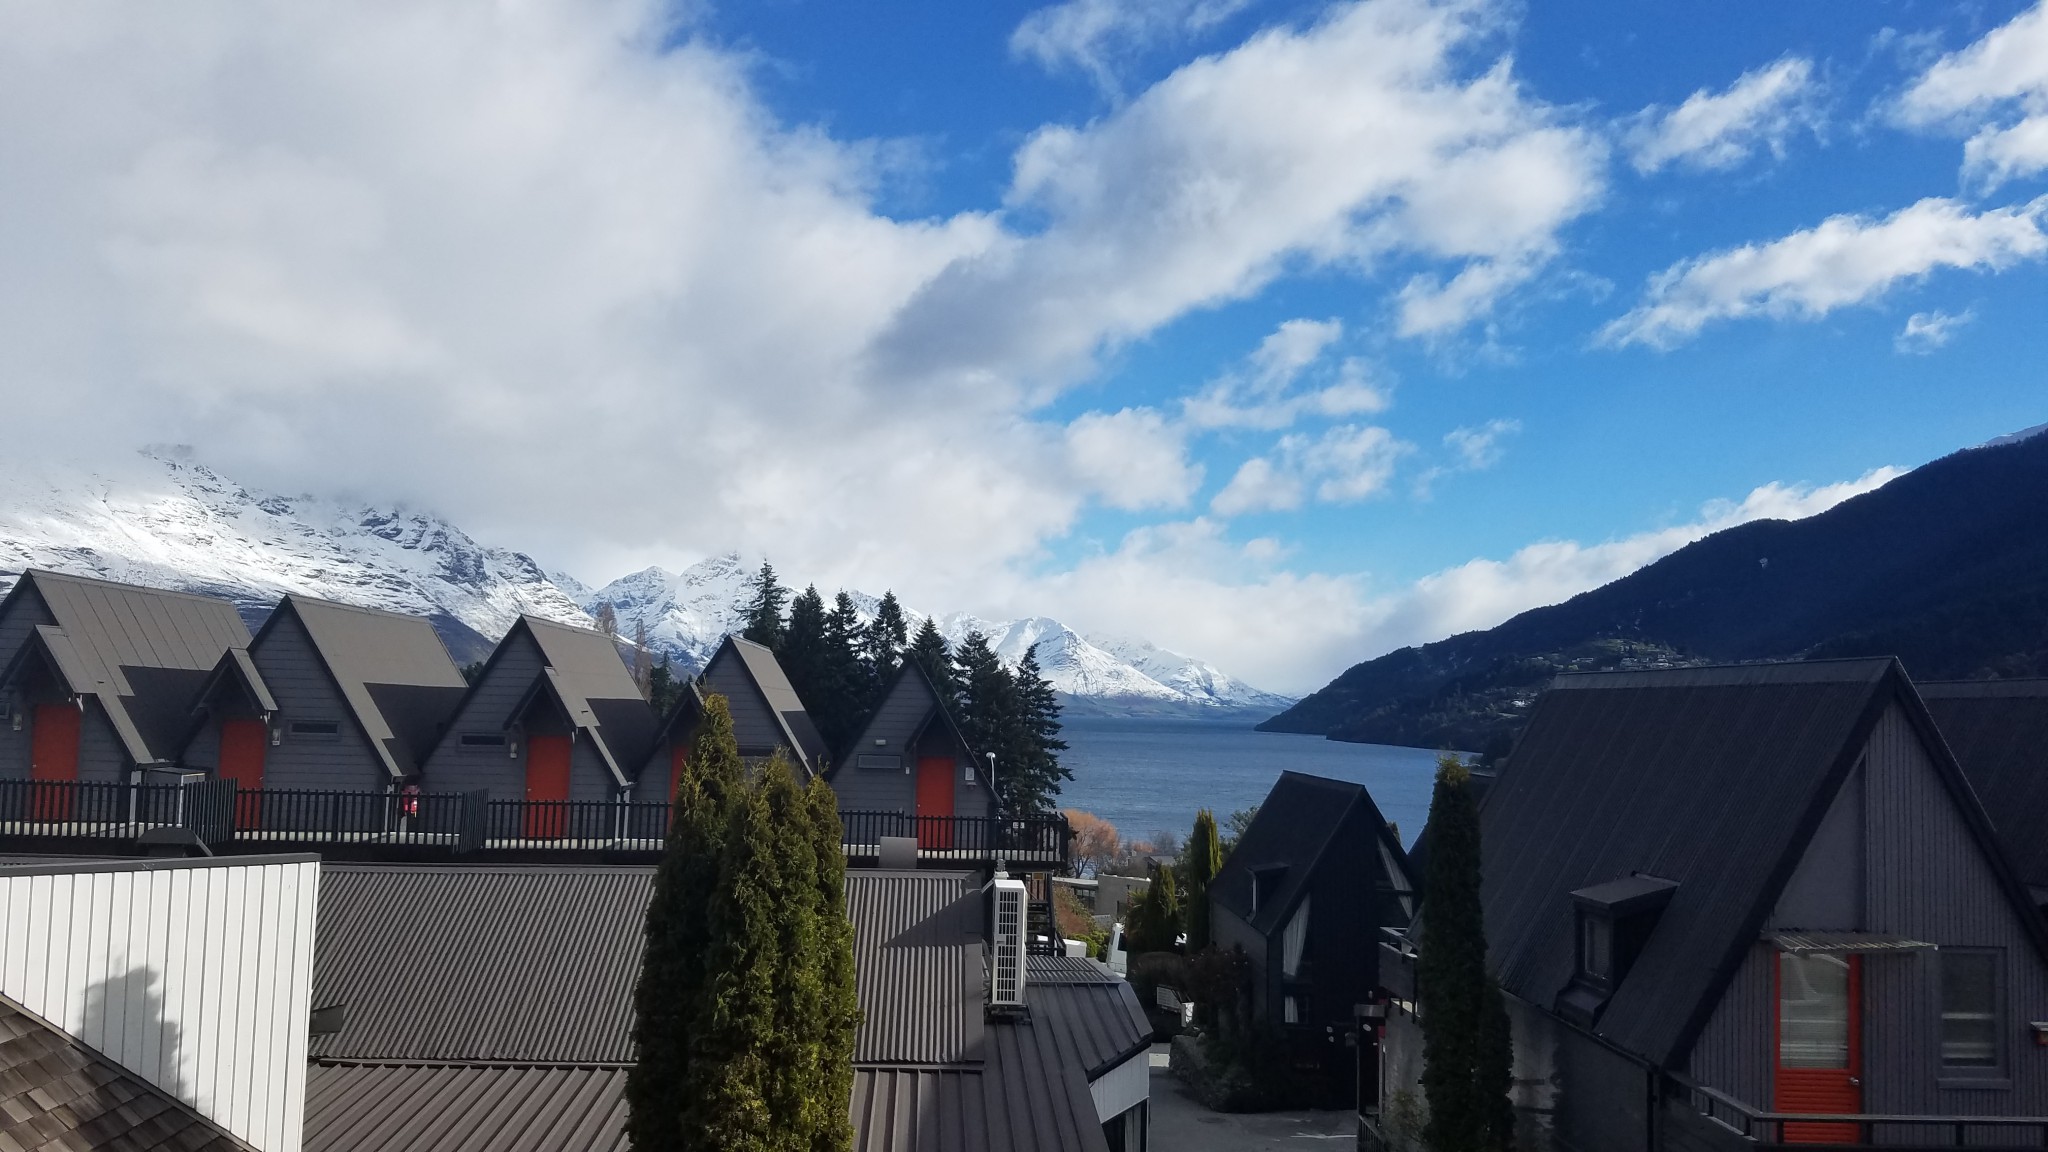 Day 9 – 9/11/17 – Arrival in Queenstown